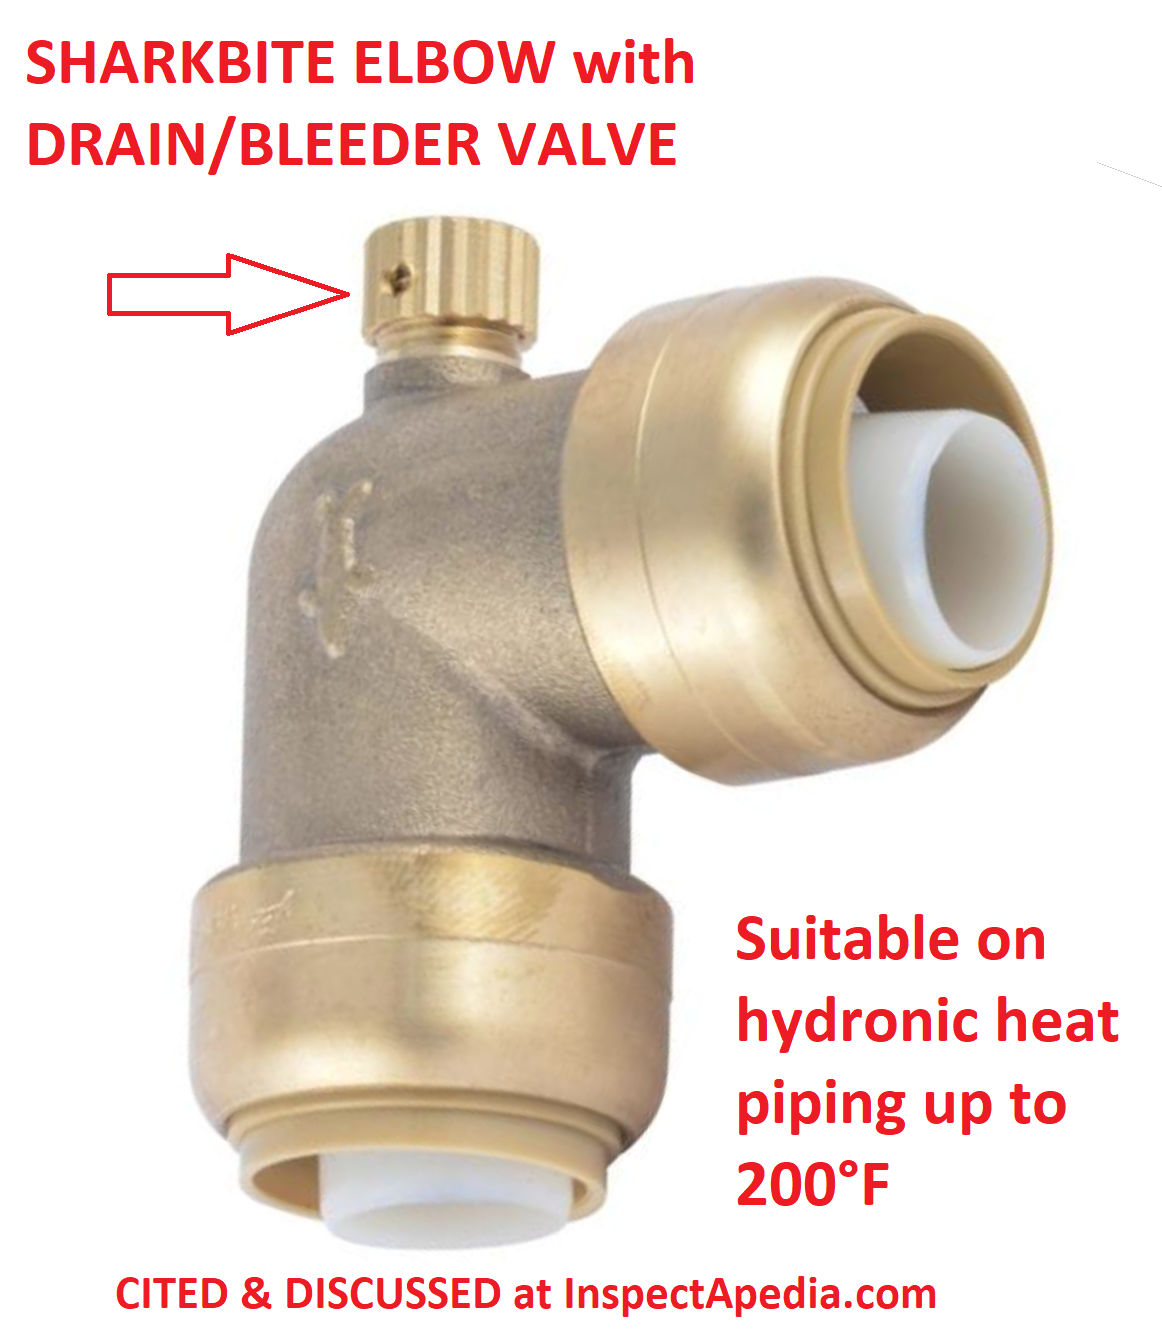 How To Bleed Baseboard Heater From Boiler Hot Water Heat Air Bleeder Valves Guide to Air Bleeders for Radiators,  Baseboards, Convectors